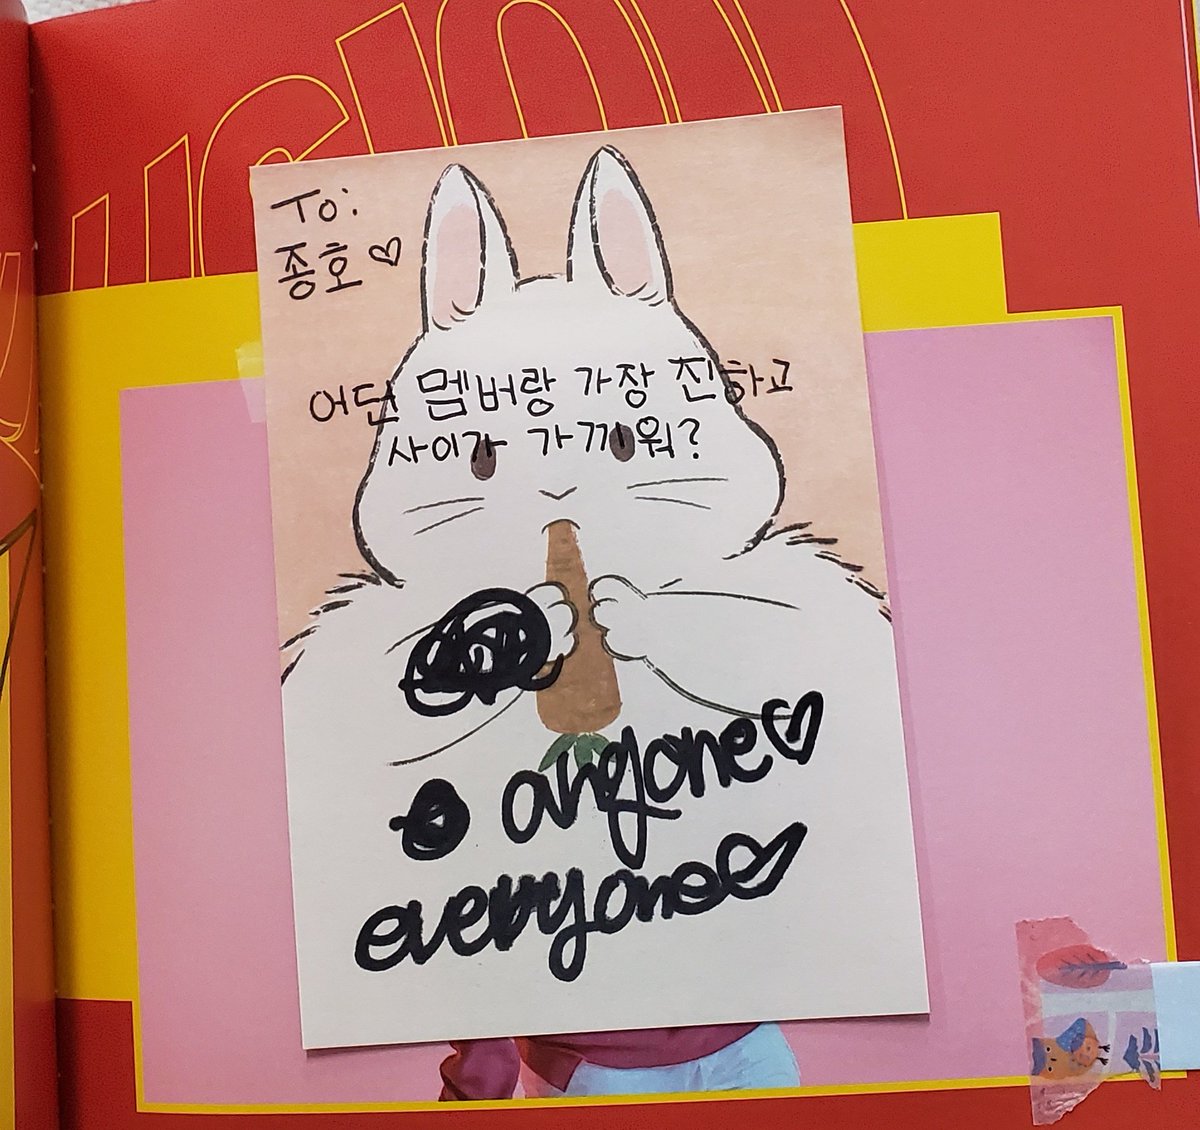 190808 ATEEZ fansign in Melbourne 》 JonghoQ: Which memb are you closest to/can confide in?A: Anyone/EveryoneHe said he's close with all and "also you now" I asked if we're friends. He said "best friends!" #ATEEZ  #ATEEZGLOBALFANSIGN  #ATEEZinMELBOURNE  #에이티즈  #종호  #최종호